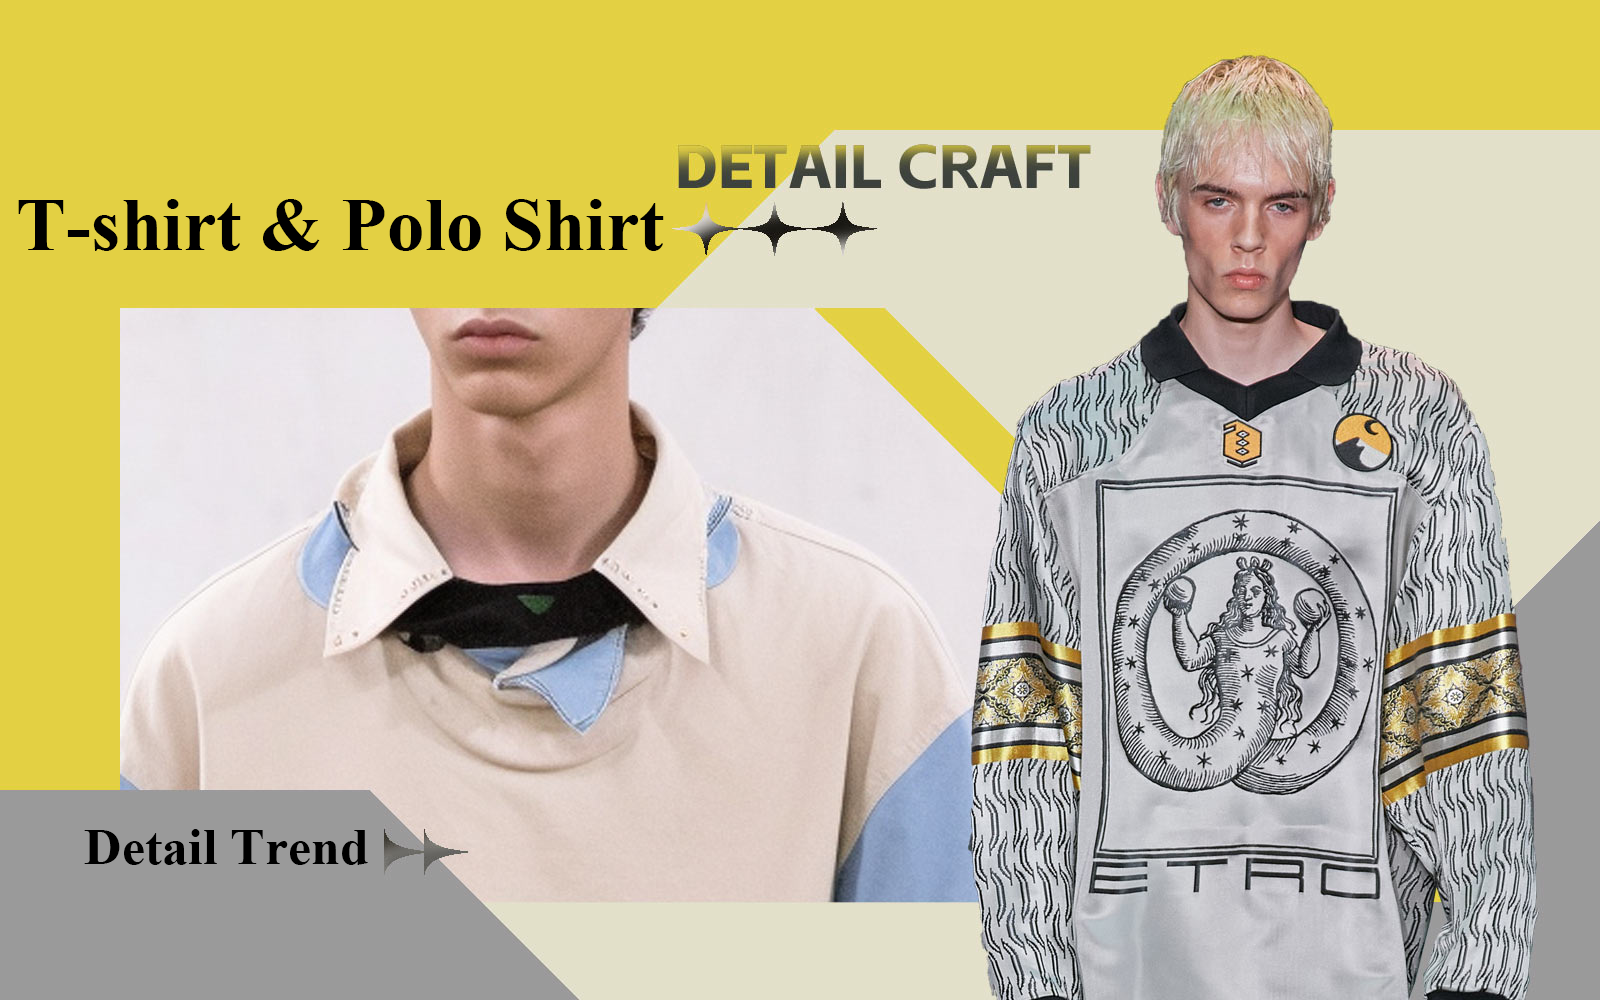 The Detail & Craft Trend for Men's T-shirt & Polo Shirt